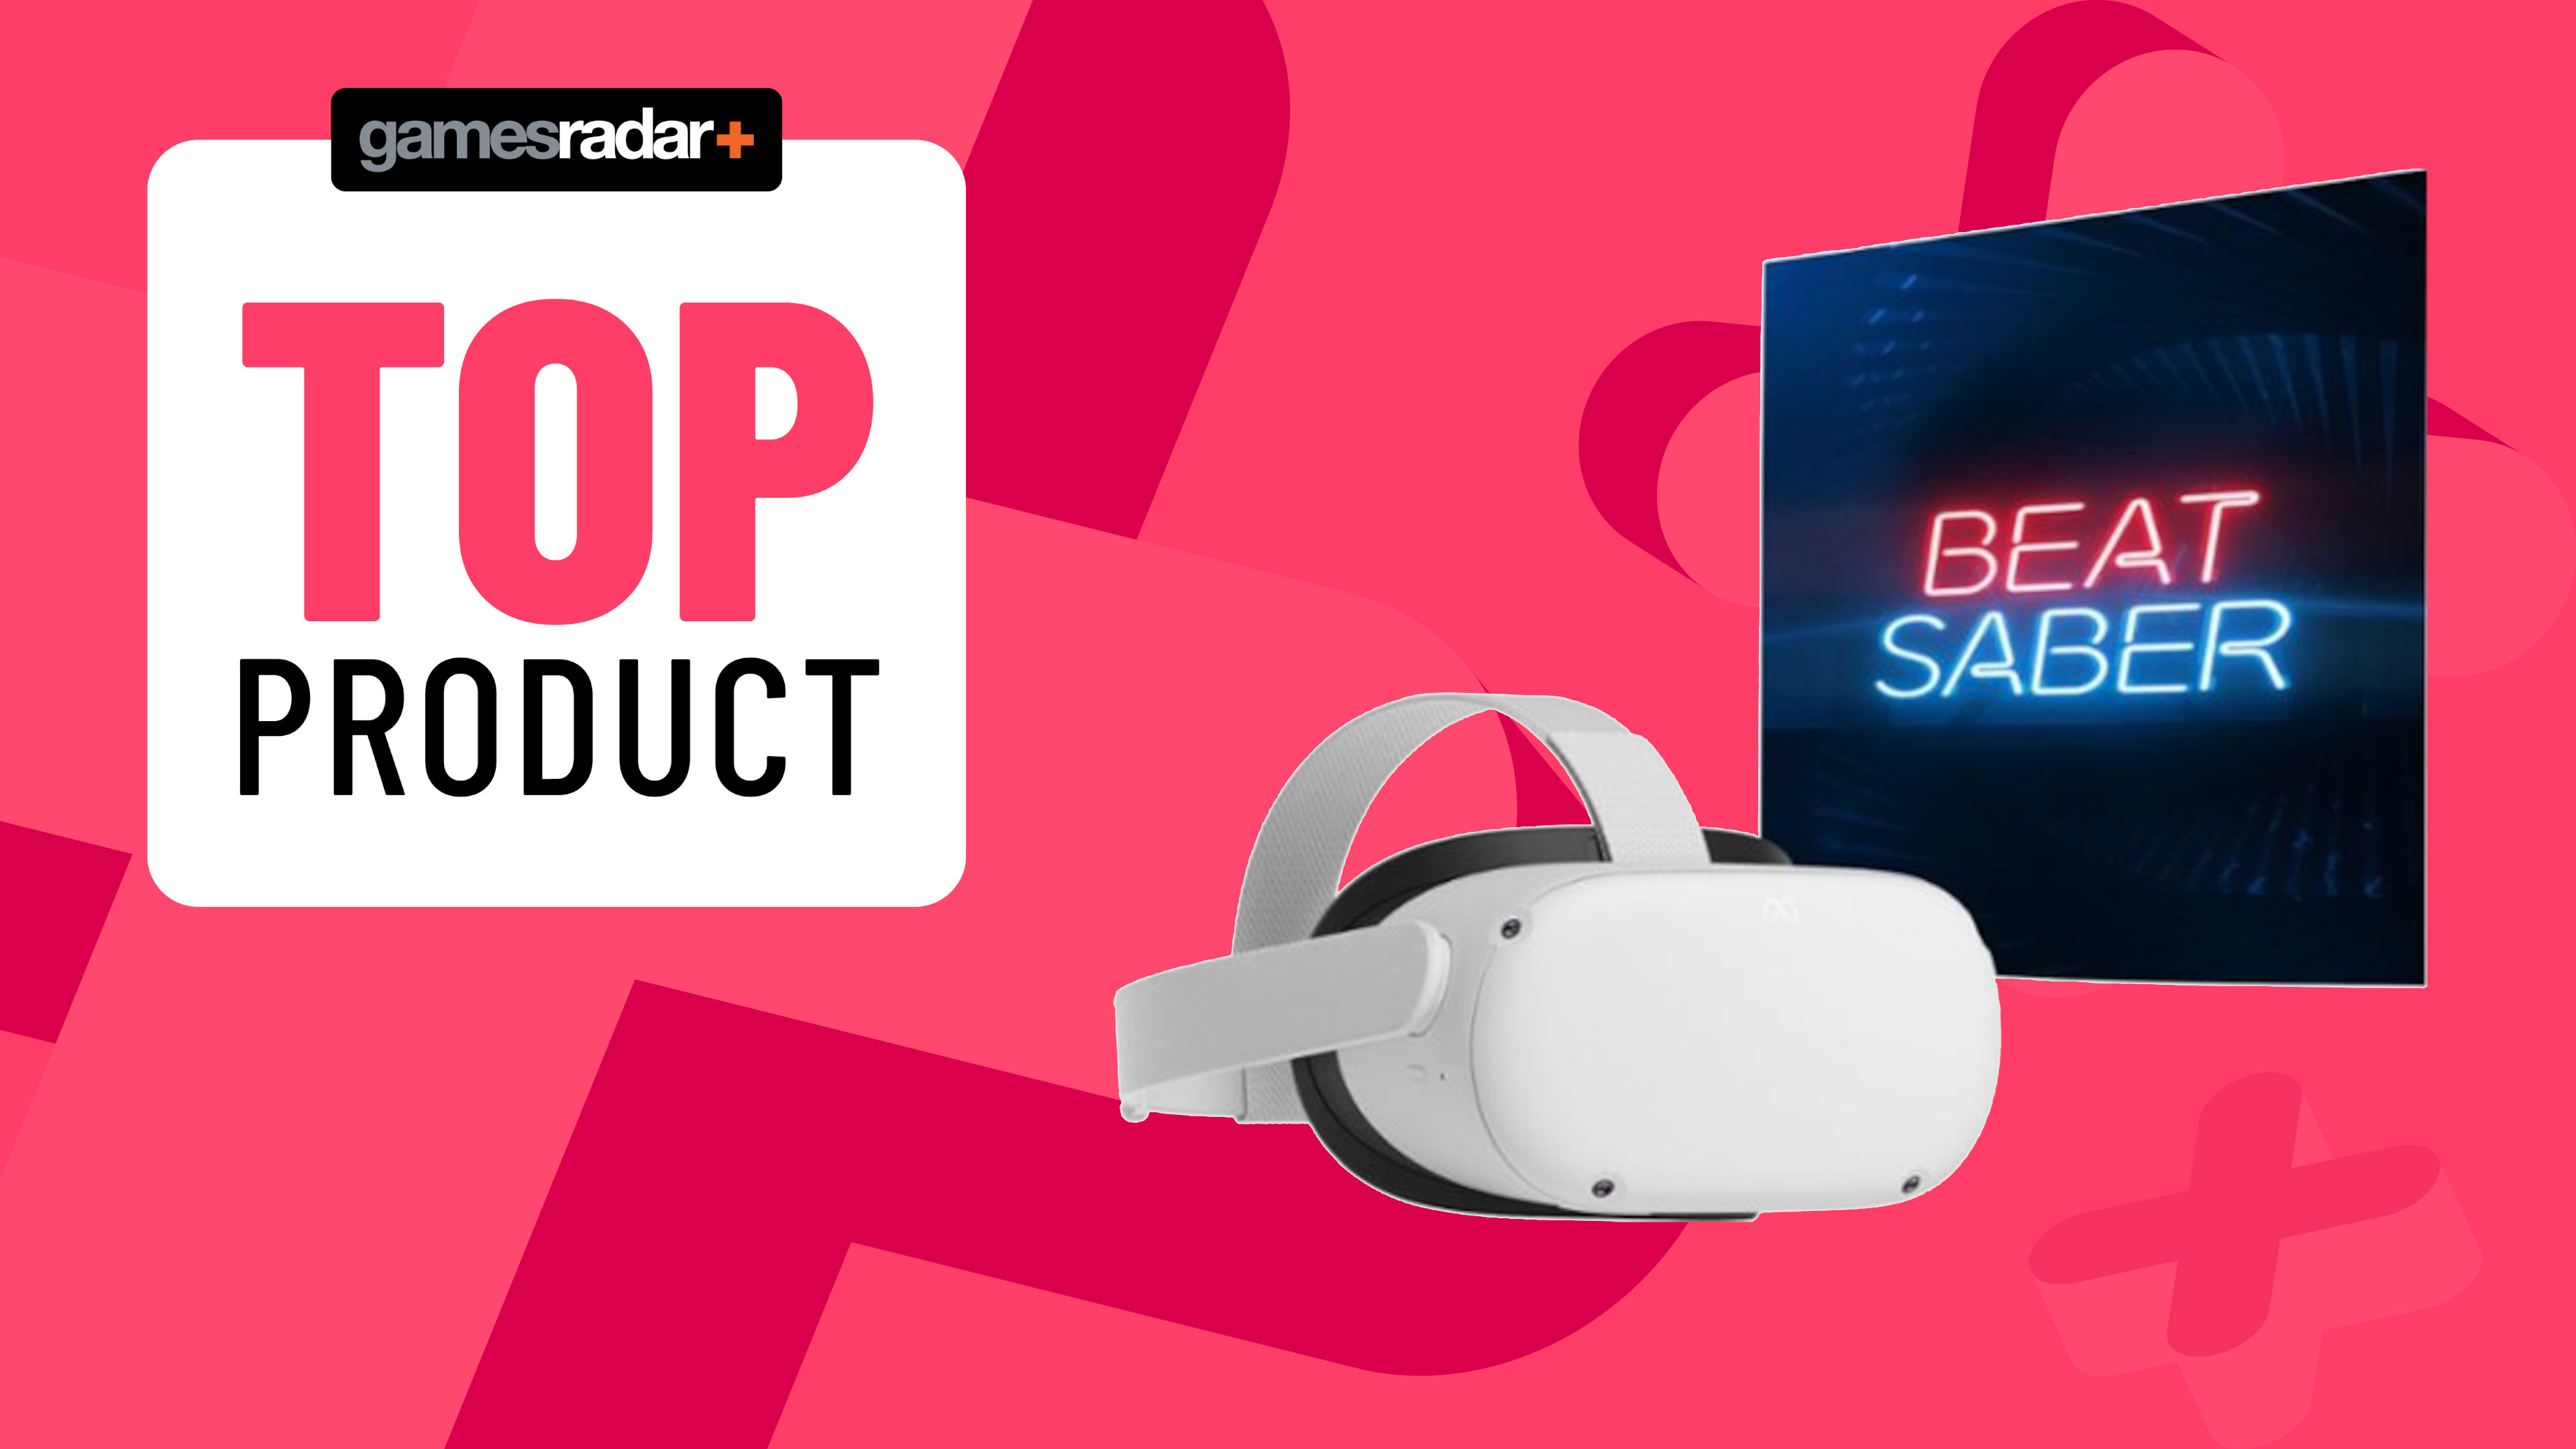 Don't miss the chance to get Beat Saber for with the Meta 2 |